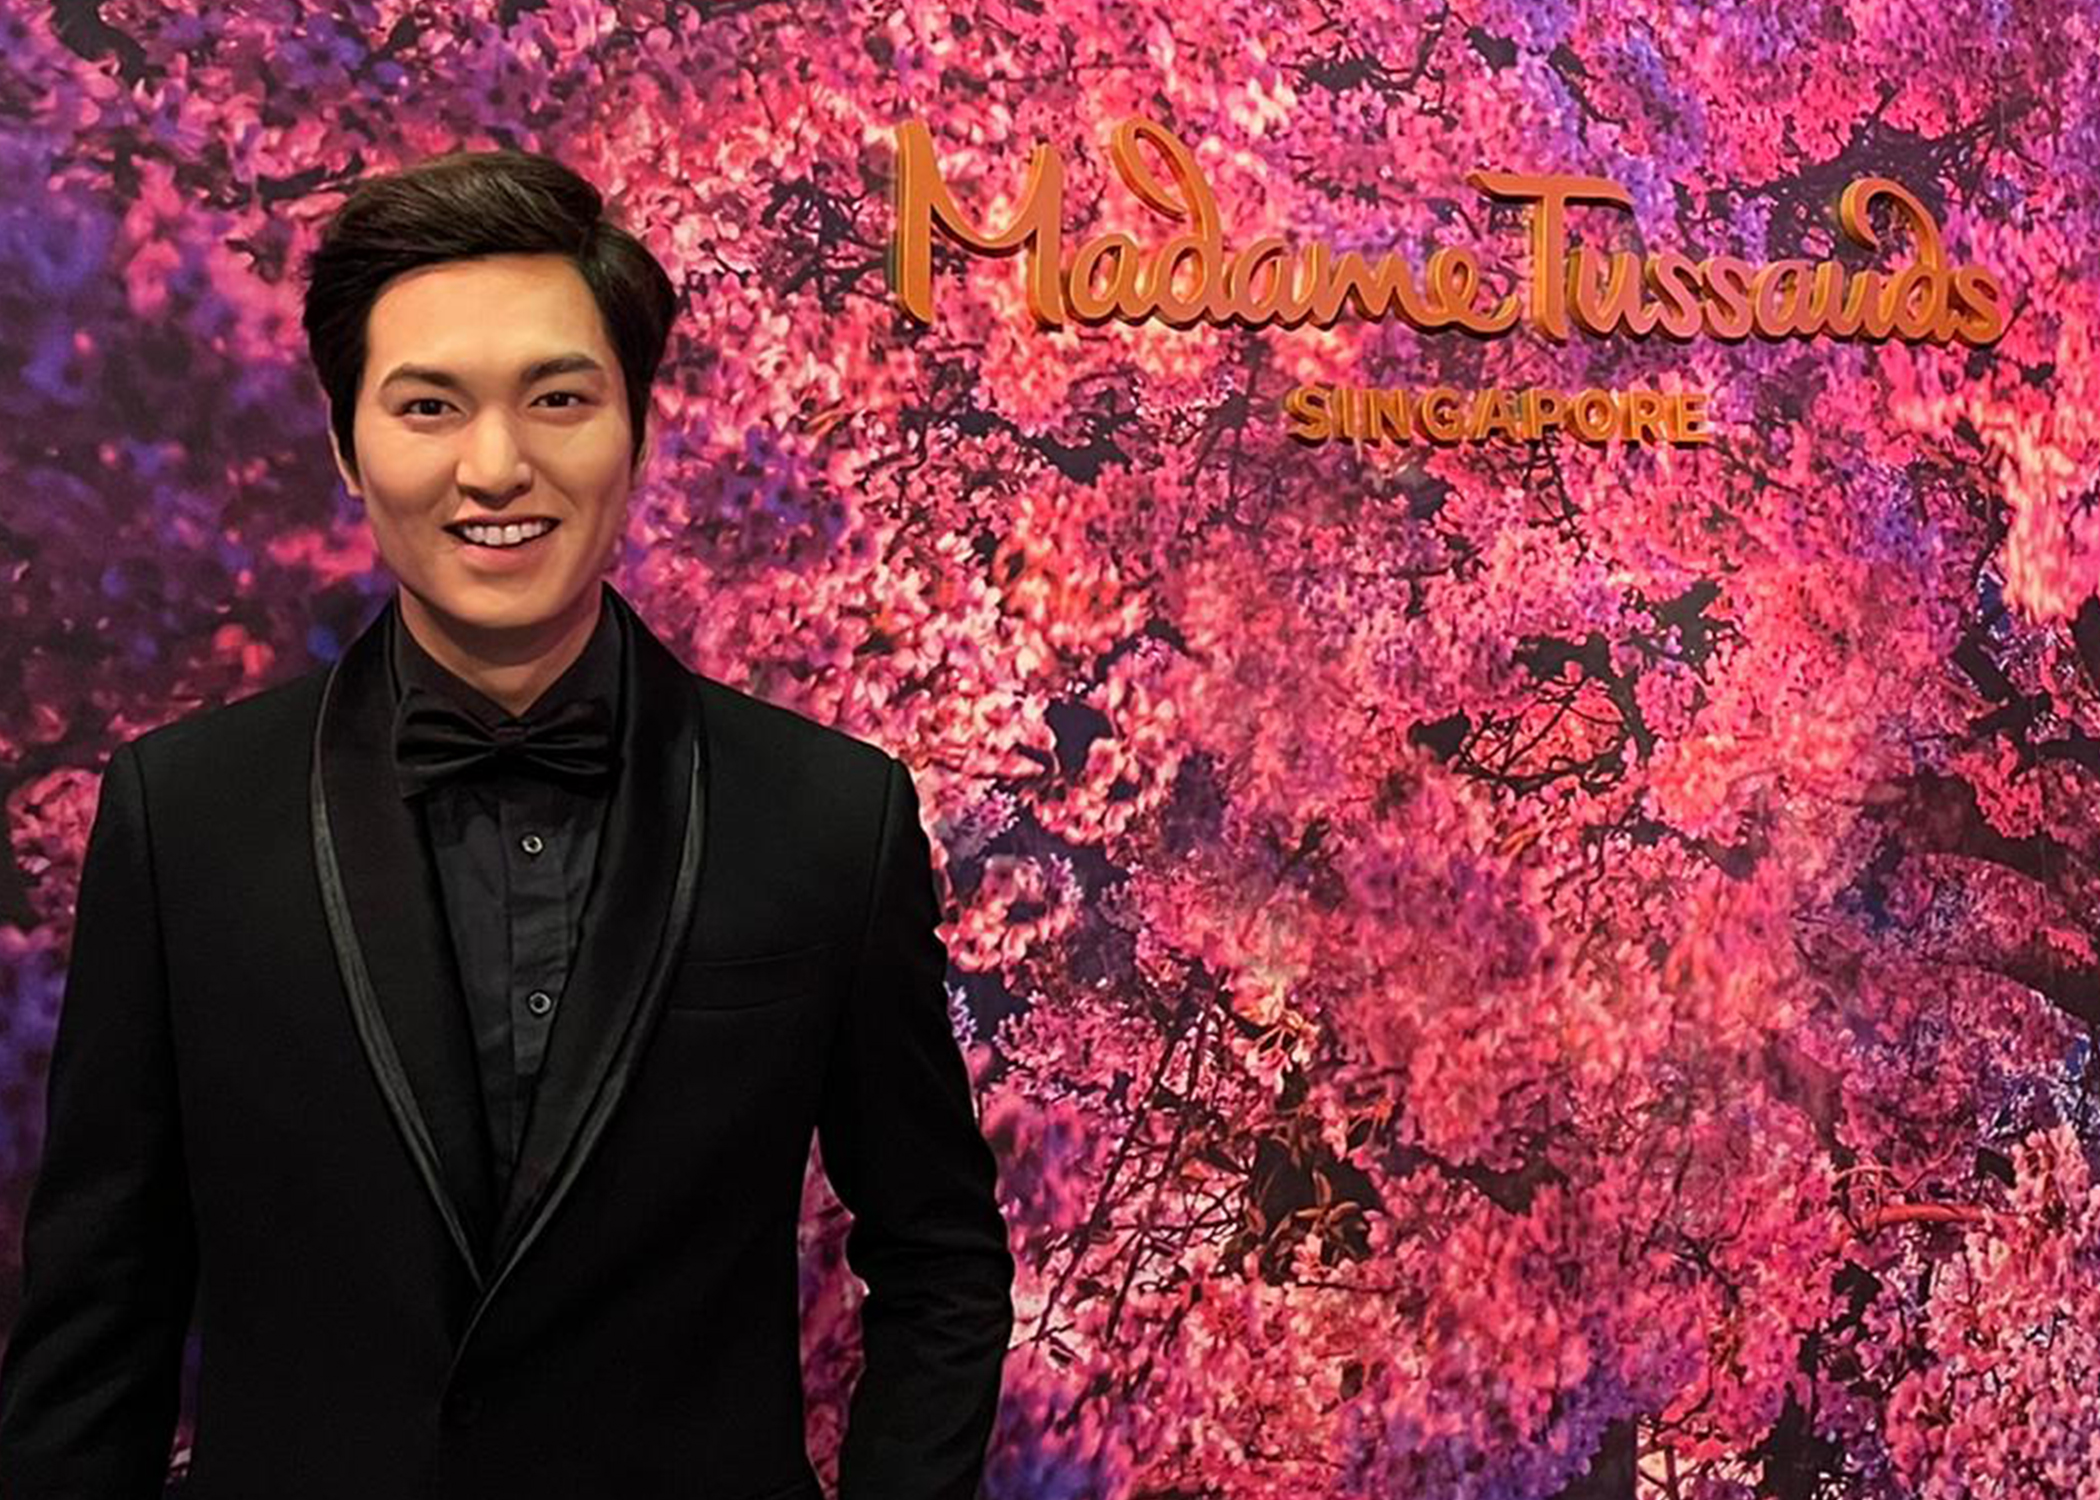 At Madame Tussauds Singapore, the wax figure of Korean celebrity and actor Lee Min Ho, dressed in a black suit and ribbon tie, smiles while standing against a backdrop of cherry blossoms